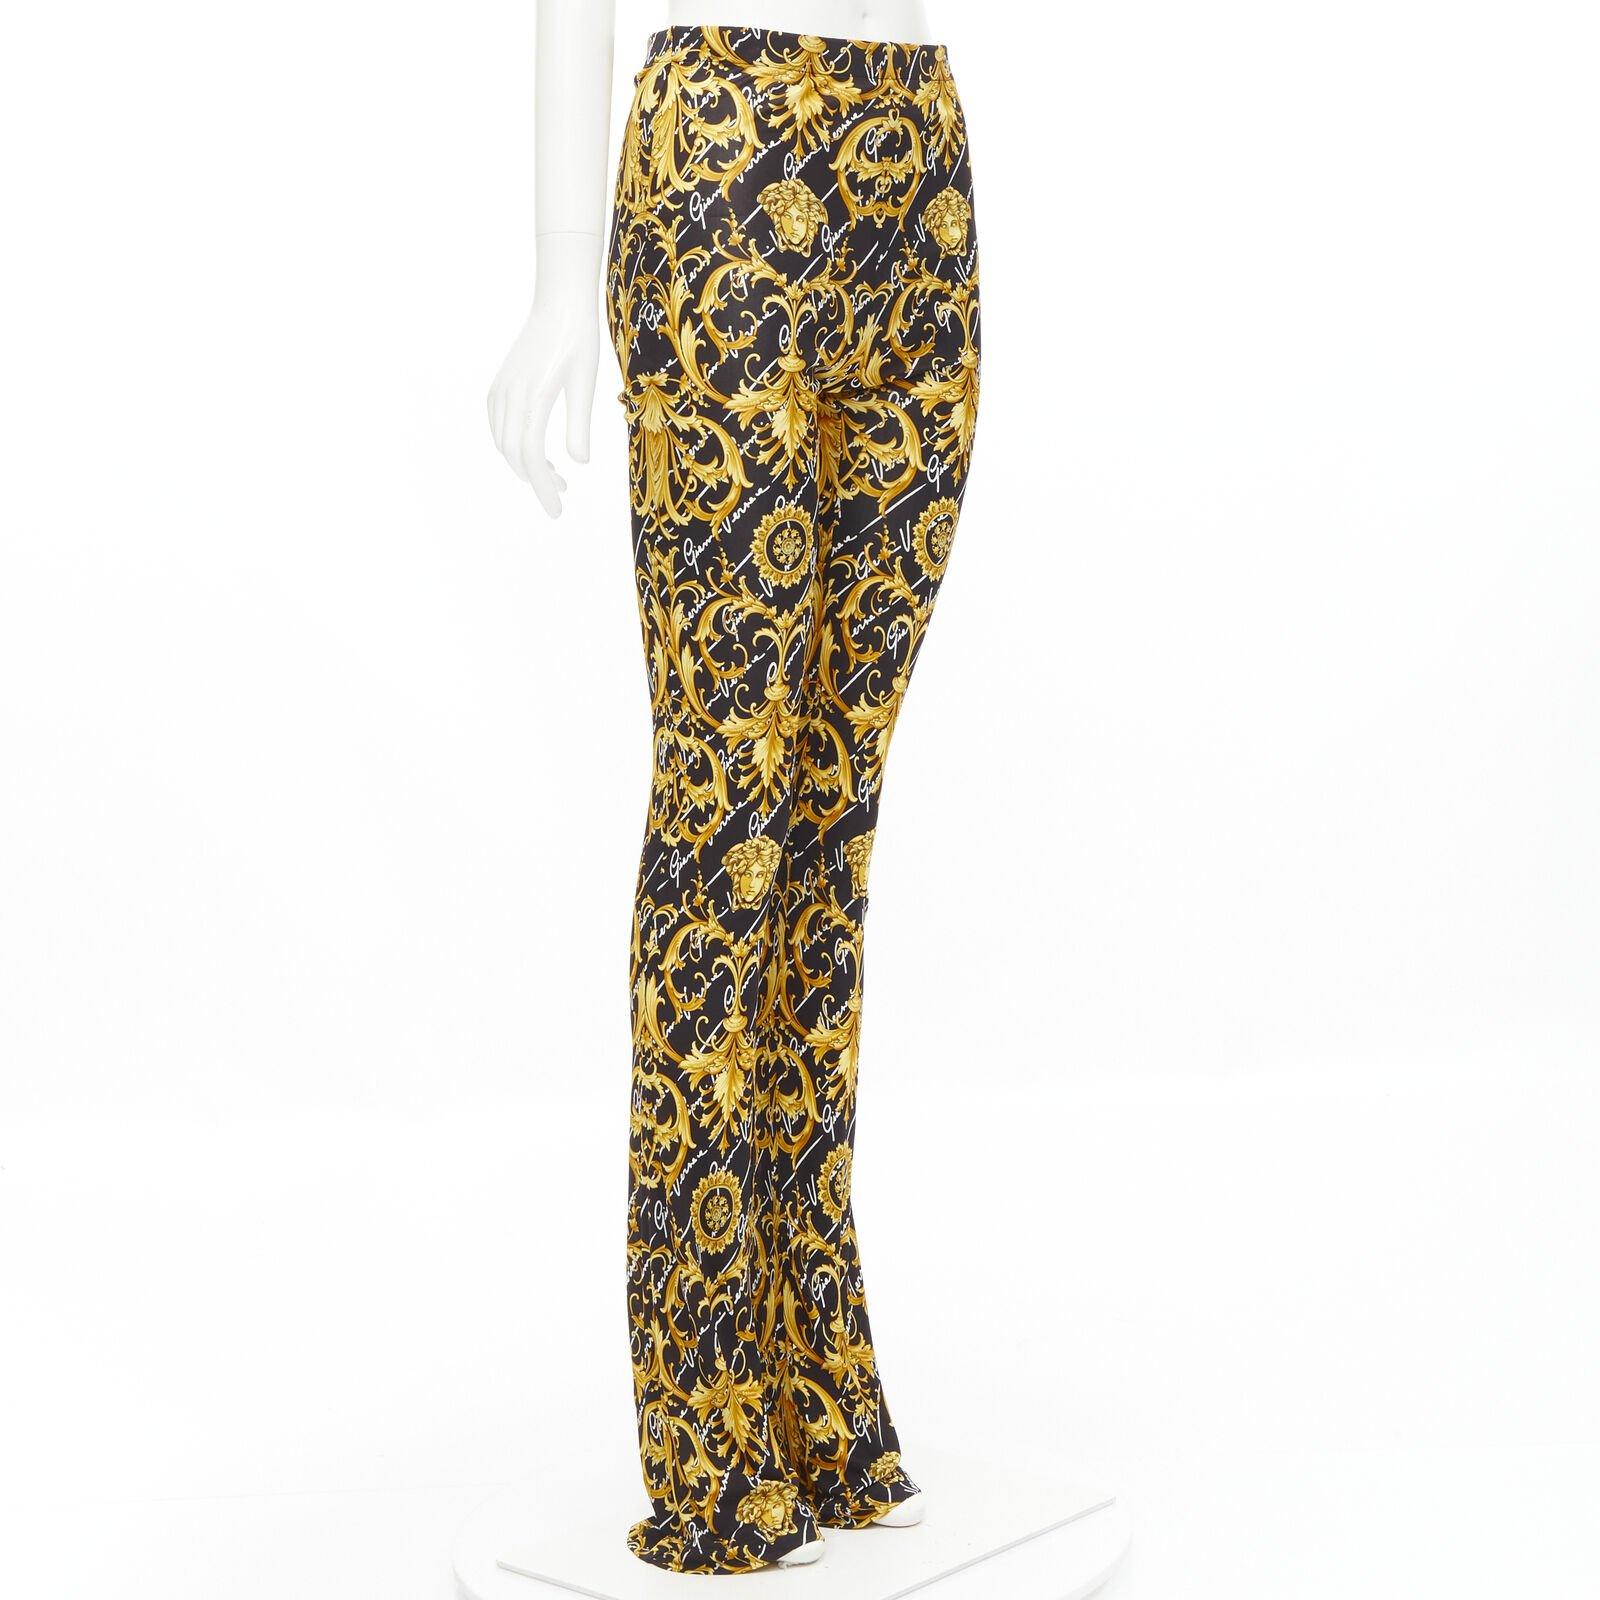 new VERSACE 2020 Runway Gianni Signature Medusa Barocco gold flare pants IT42 M
Reference: TGAS/C01161
Brand: Versace
Designer: Donatella Versace
Model: A85698 A233237 A7900
Collection: Gianni Signature - Runway
Material: Viscose
Color: Gold,